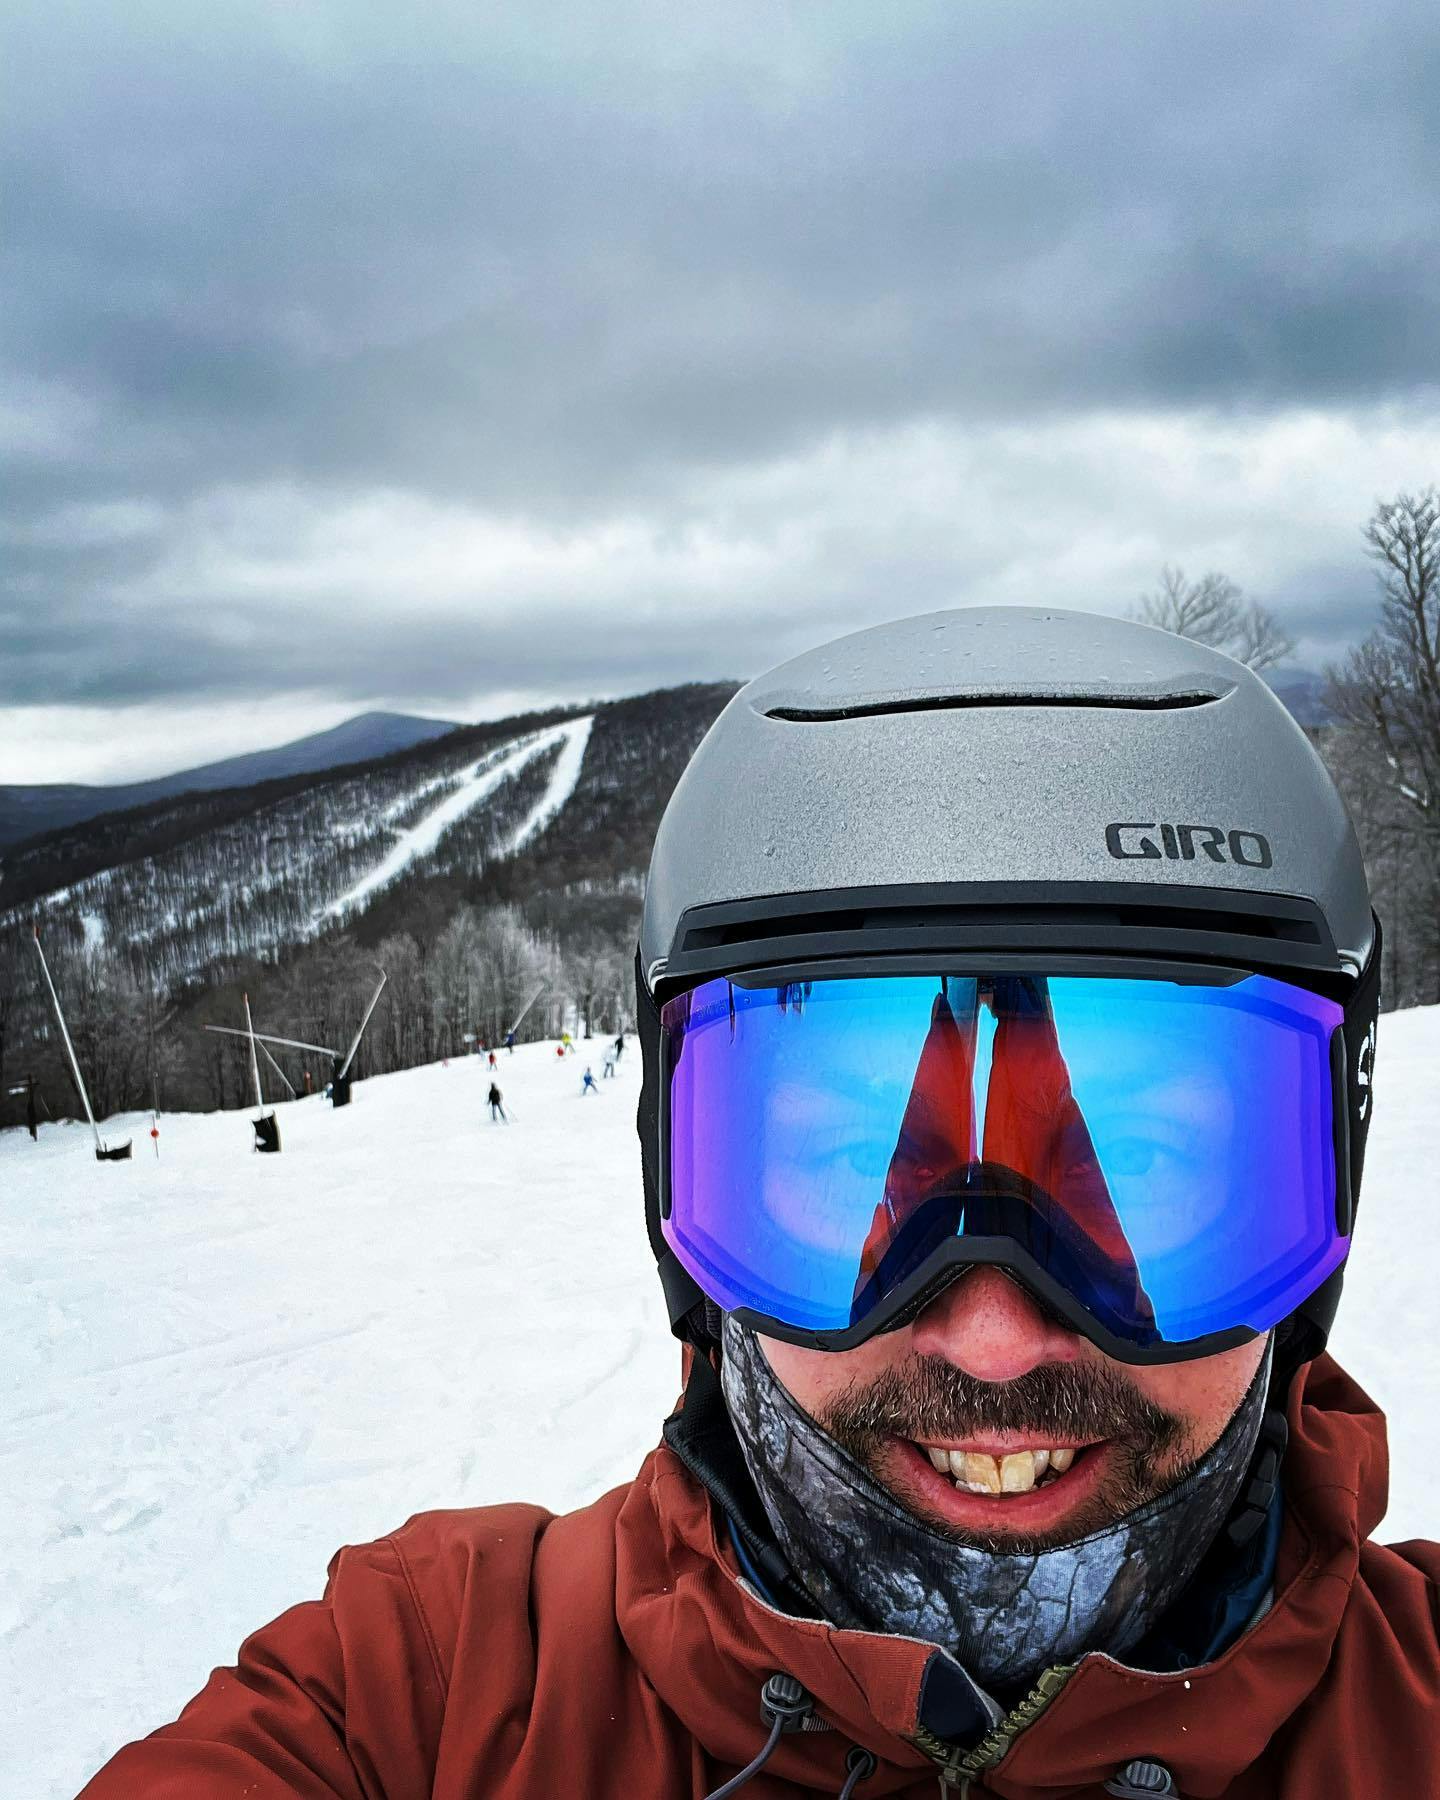 A skier taking a selfie while wearing a ski helmet and the Smith Squad MAG Goggles · 2022. There is a ski resort in the background. 